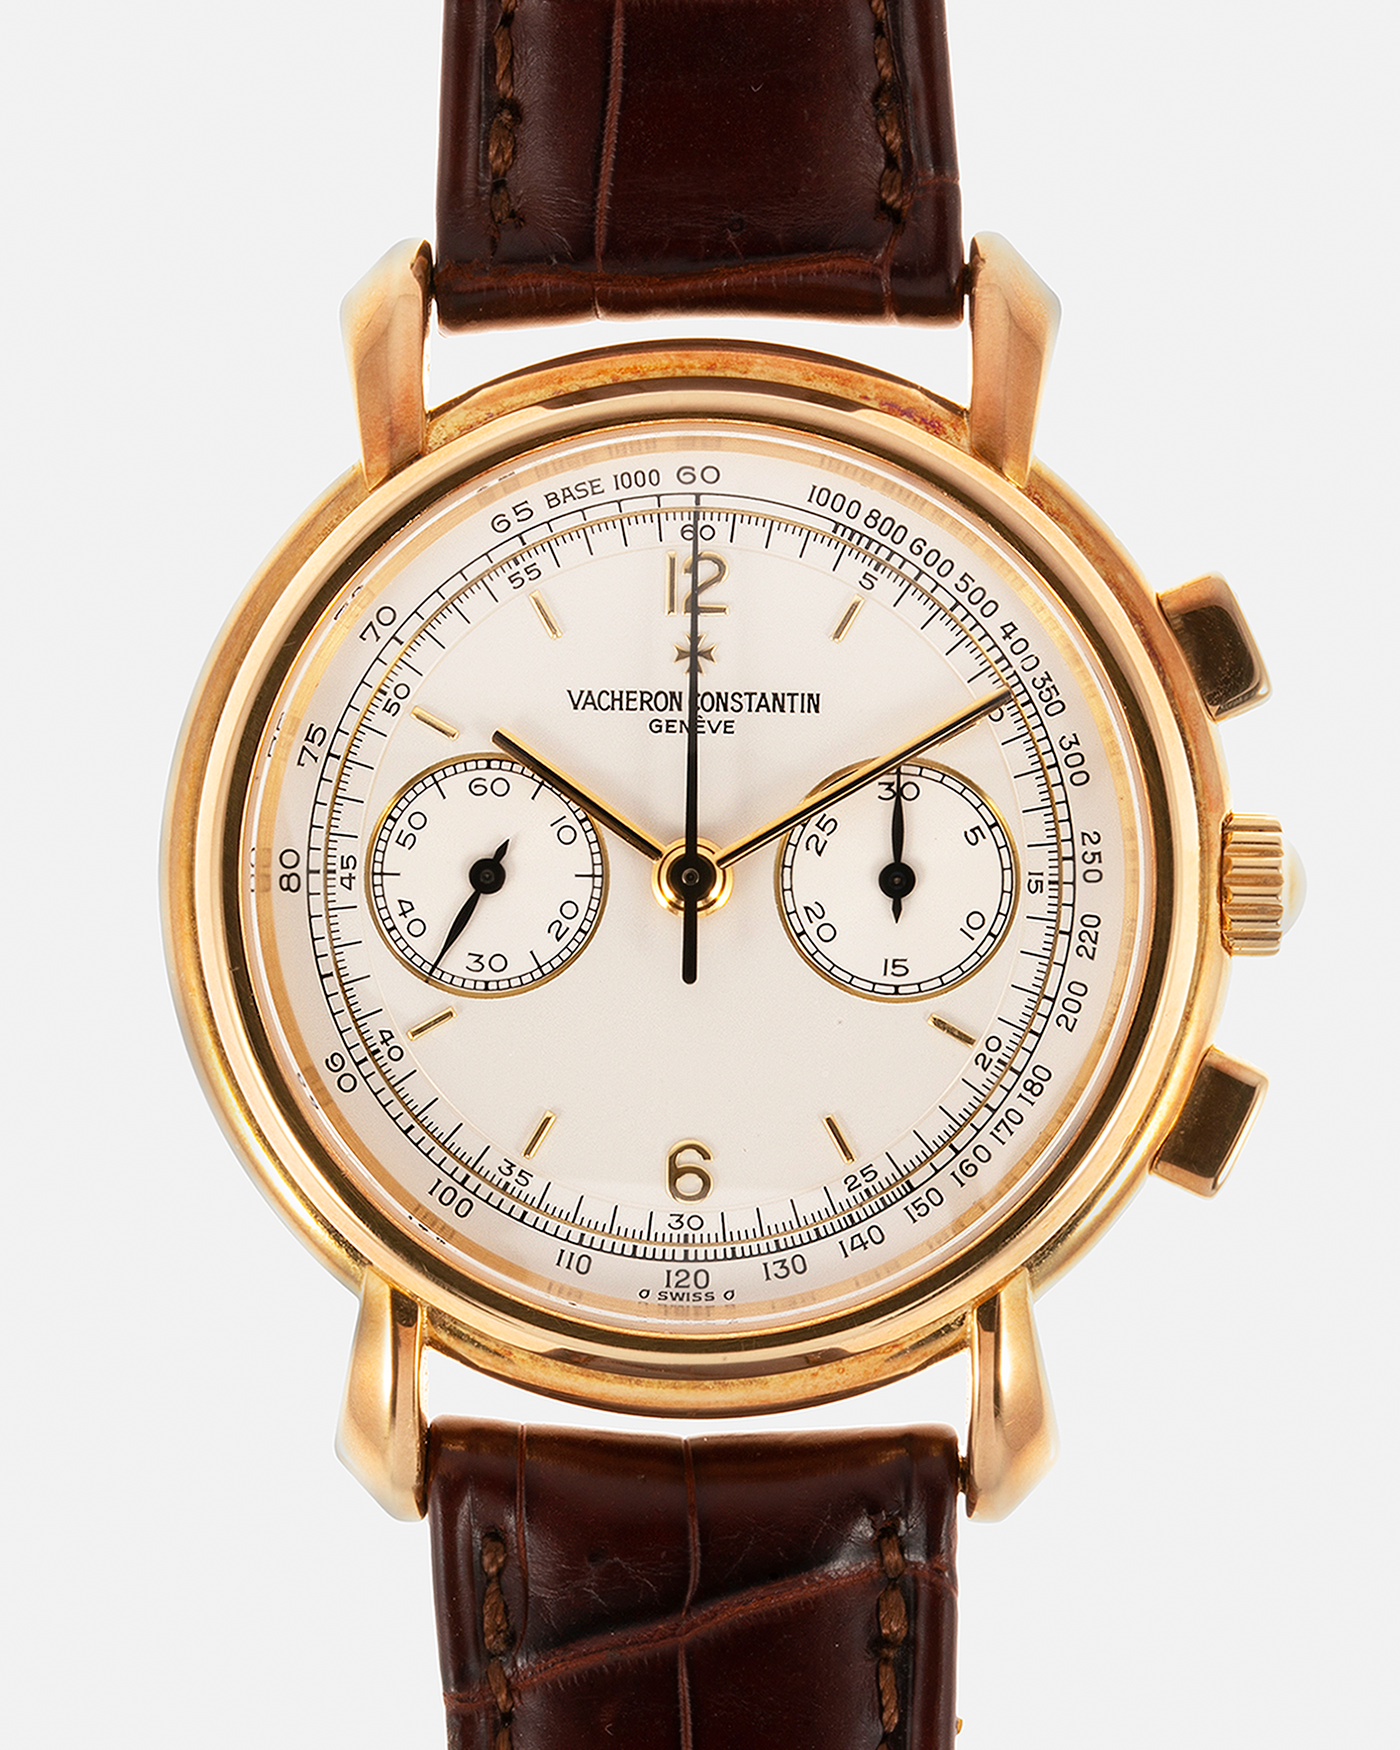 Brand: Vacheron Constantin Year: 2001 Model: Les Historiques Chronograph  Reference Number: 47101 Material: 18-carat Yellow Gold Movement: Lemania 2320 Based Cal. 1141, Manual-Winding Case Diameter: 37mm Strap: Vacheron Constantin Alligator Brown Leather Strap with Signed 18-carat Yellow Gold Tang Buckle